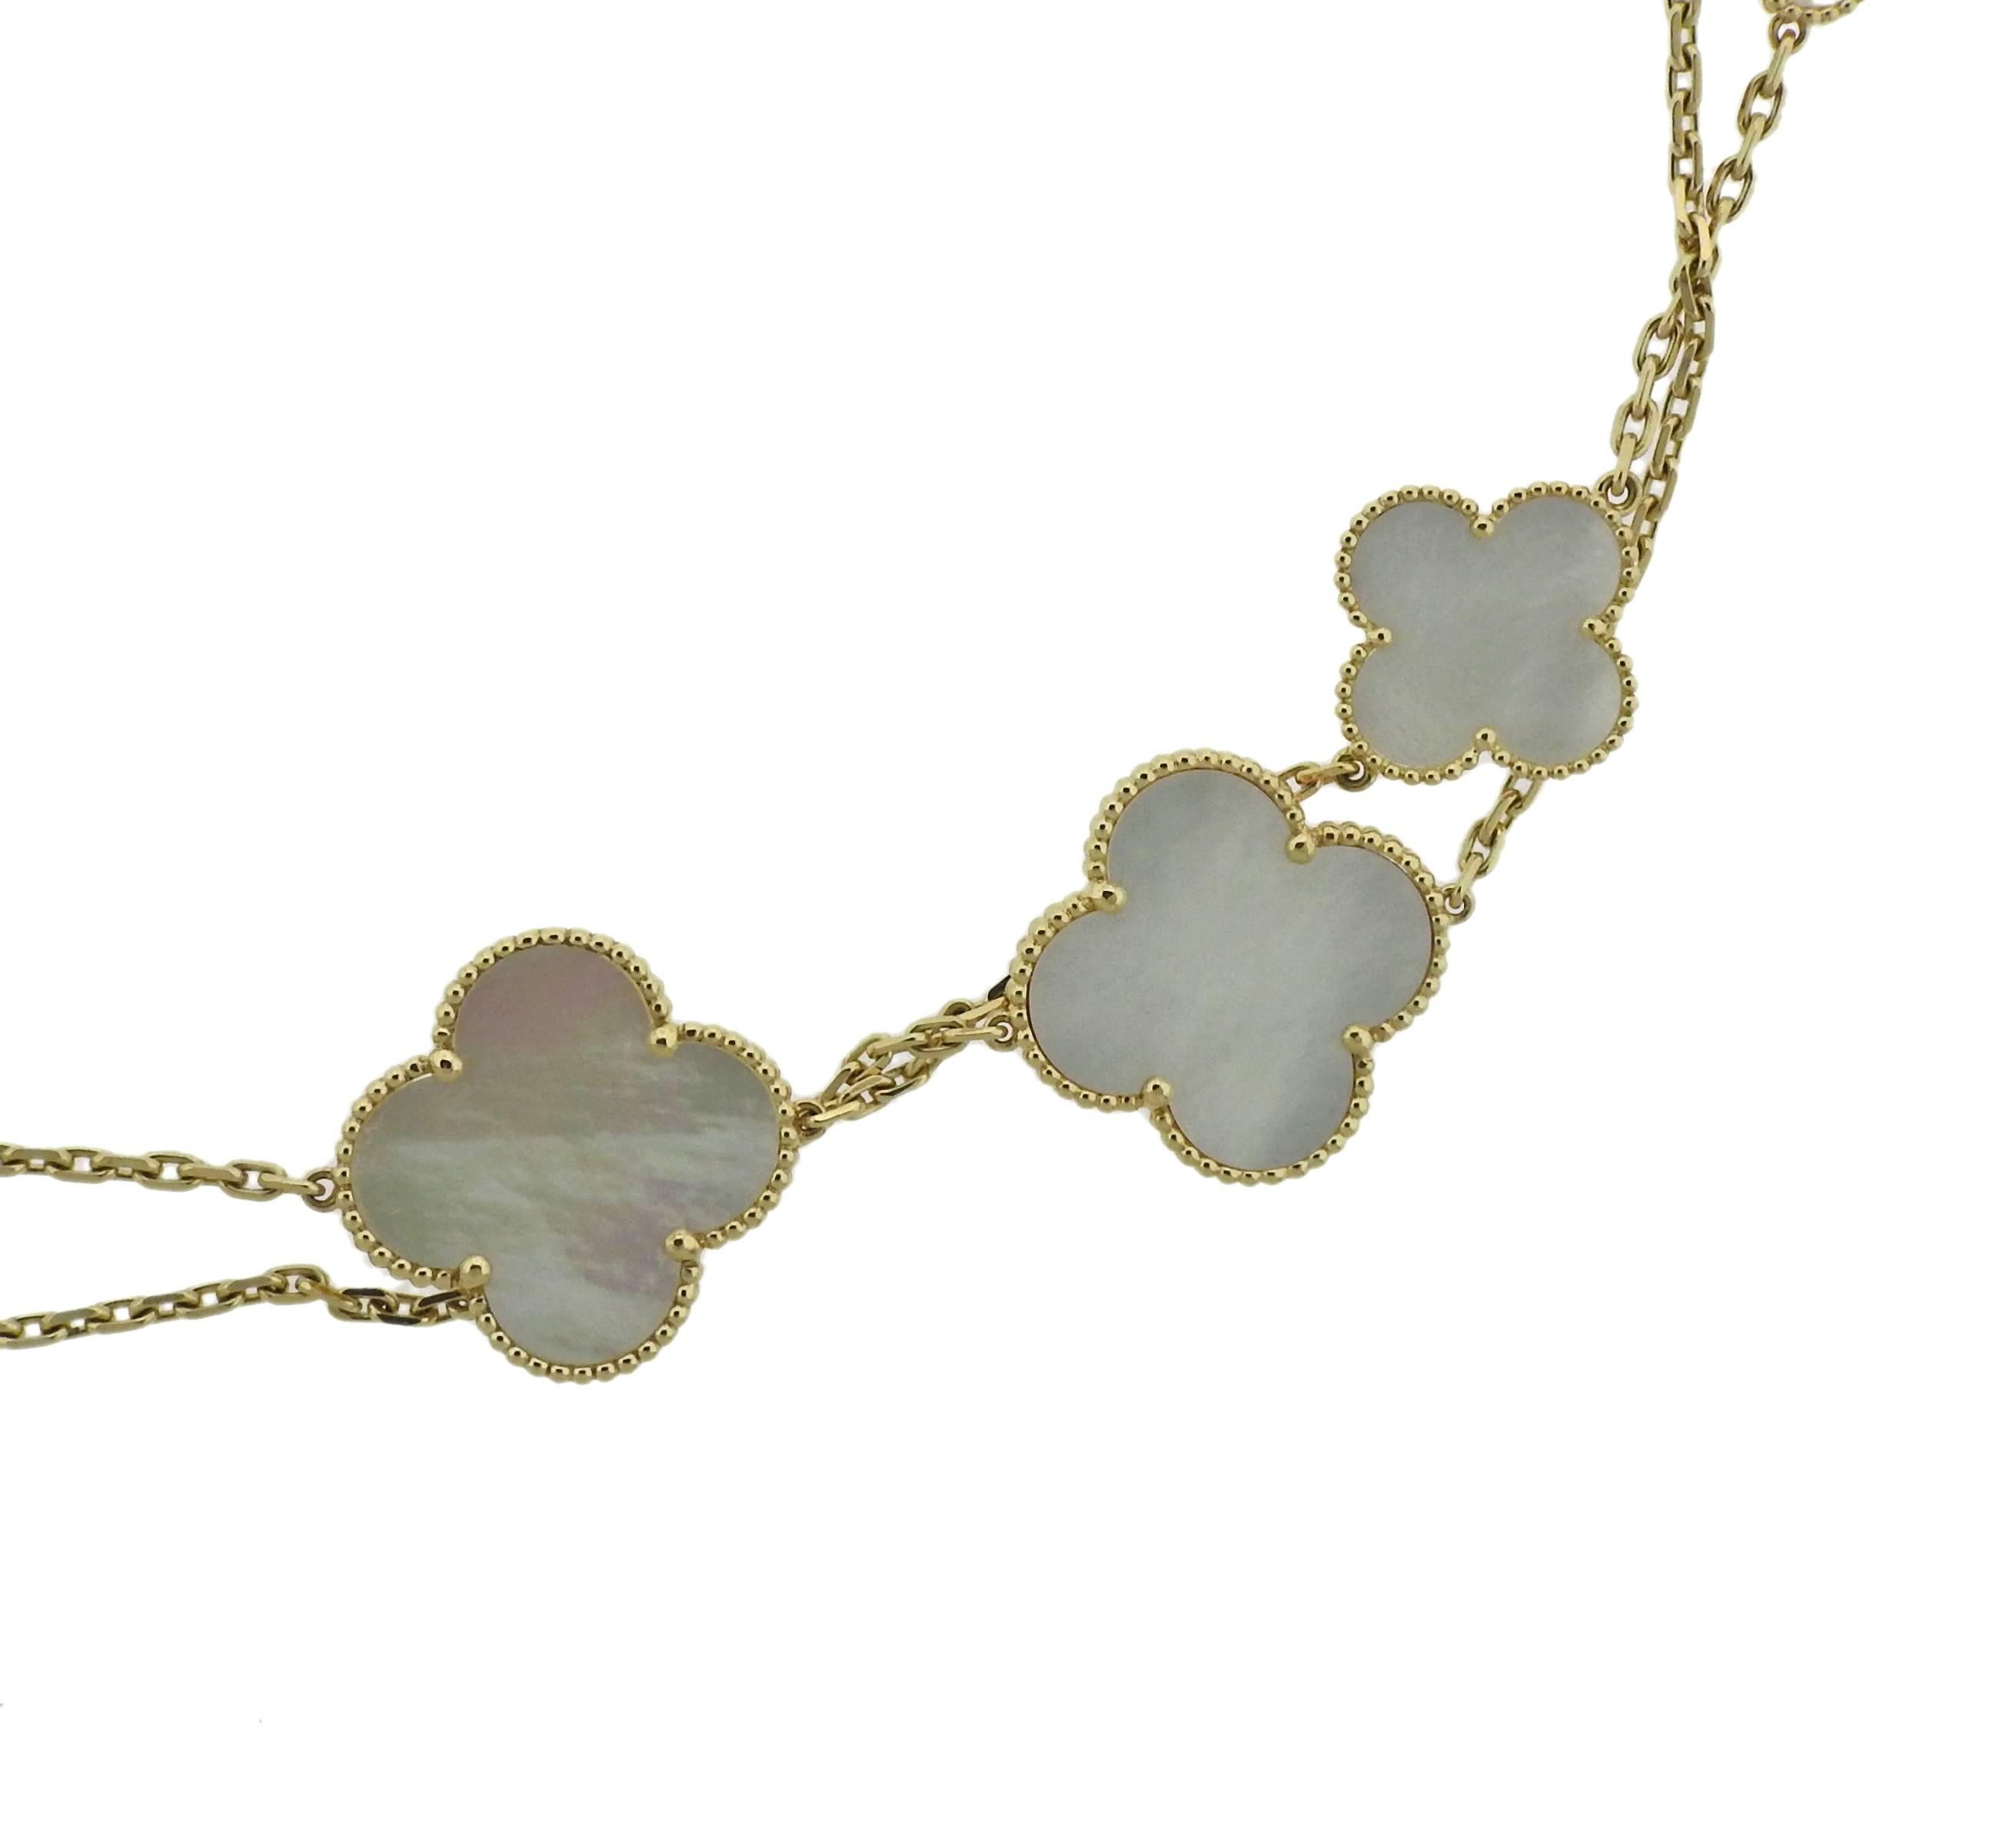 Iconic Magic Alhambra necklace, featuring 16 mother of pearl multi size motifs, crafted in 18k gold by Van Cleef & Arpels. Retail $23100. Comes with COA and pouch. Necklace is 49